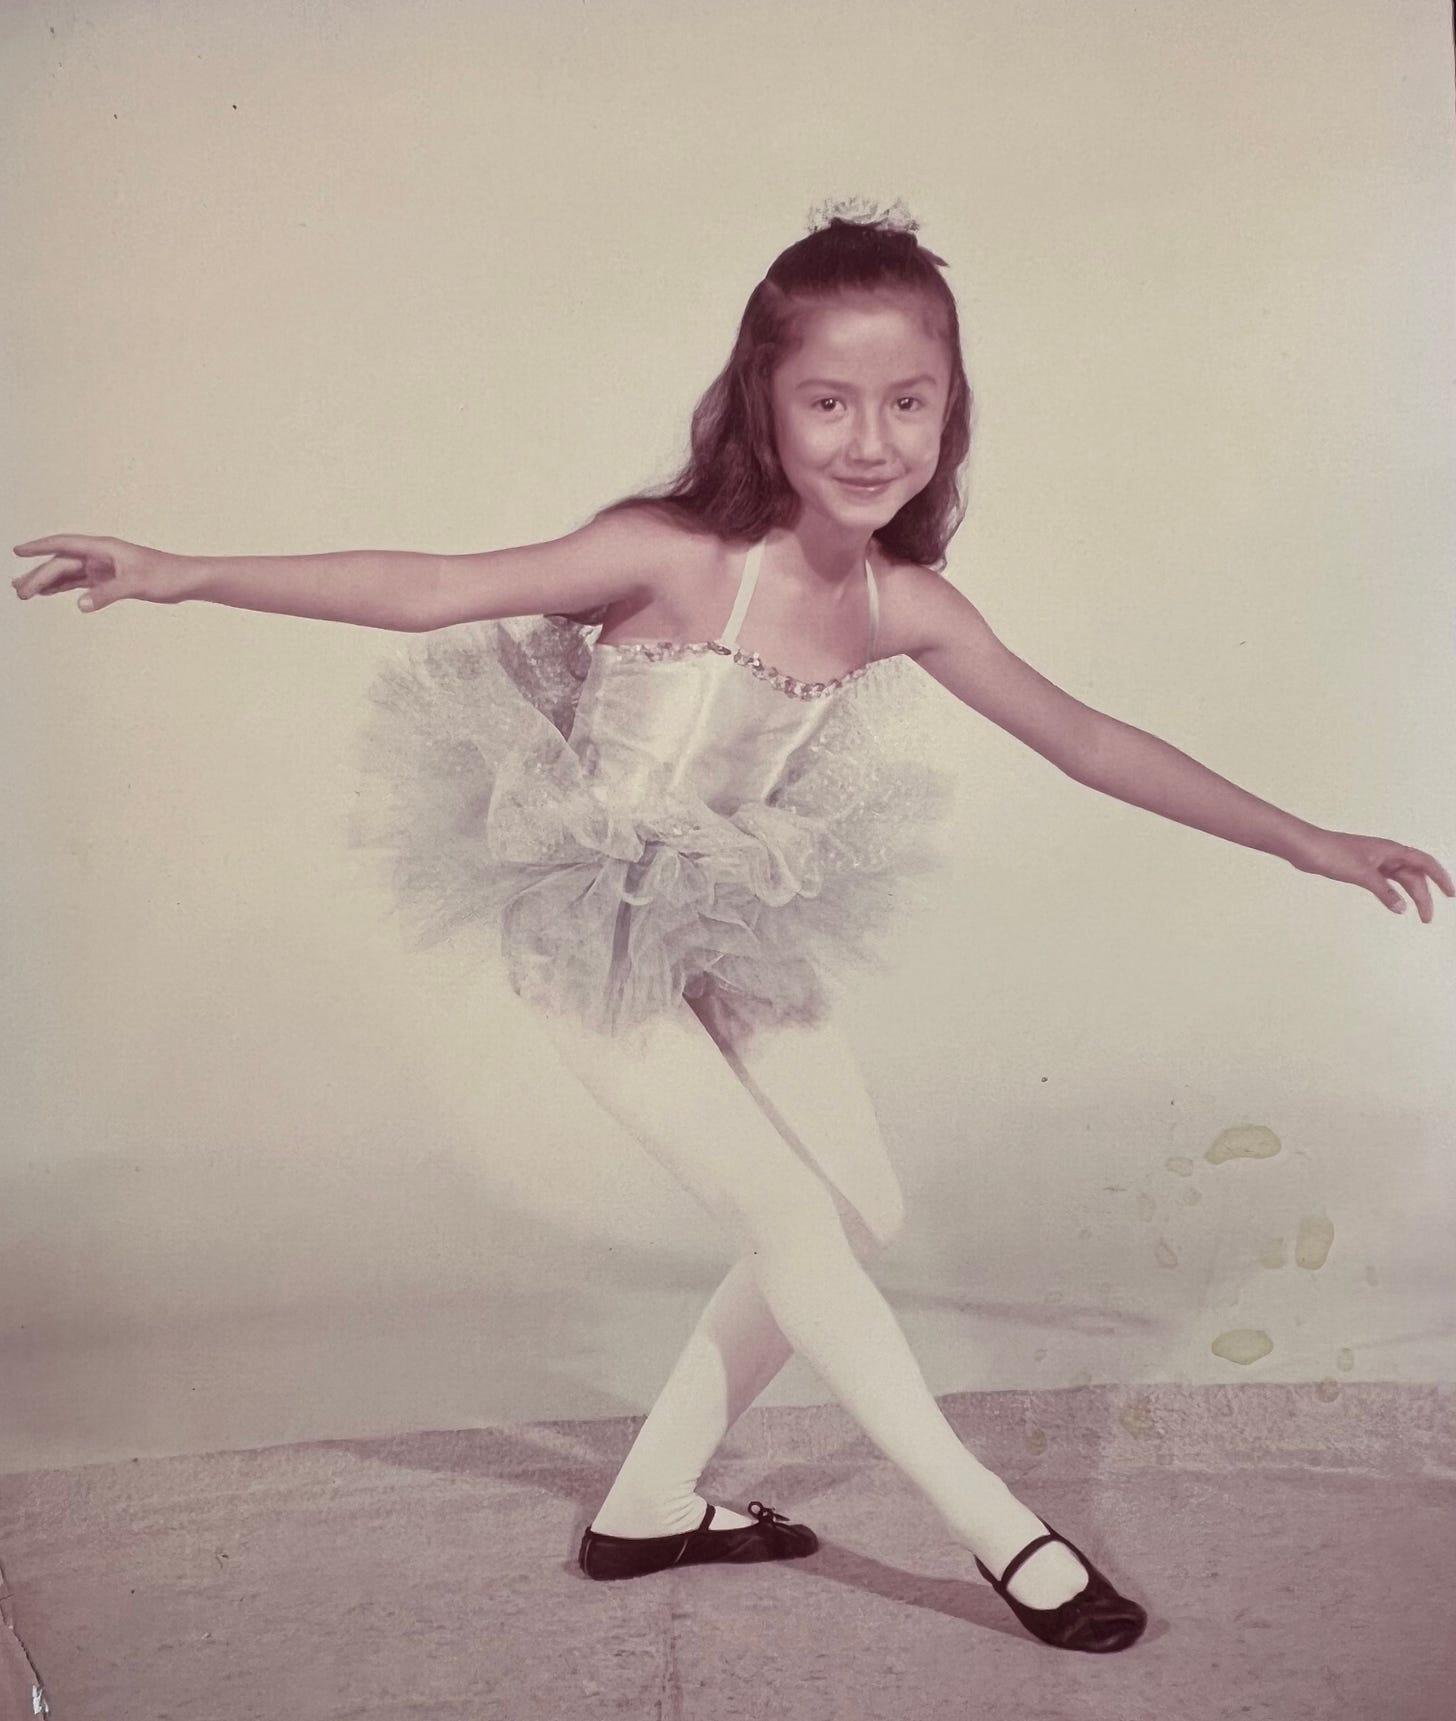 Demian, around 7 or so years old, in a silver ballerina costume with tutu, doing a ballet bow with a sparkle of happiness in her eye.